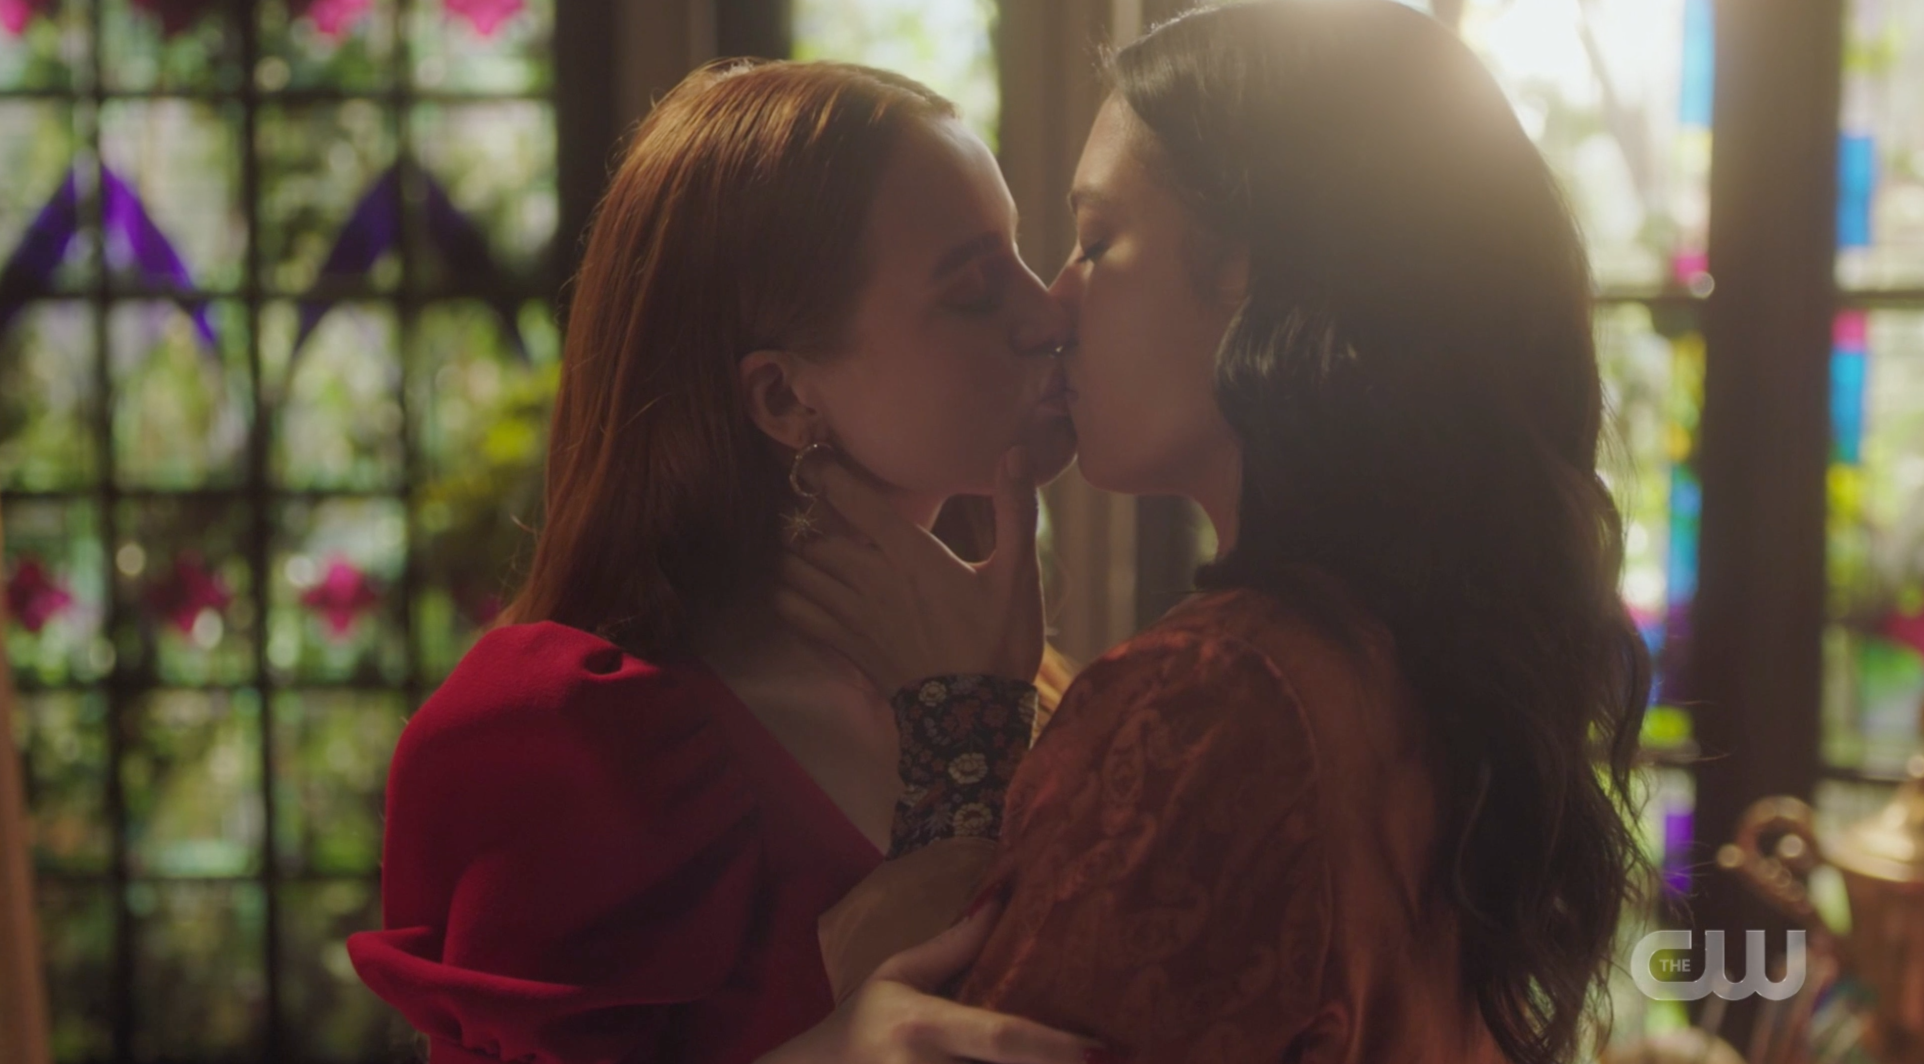 Cheryl and Minerva also kissed this week! 